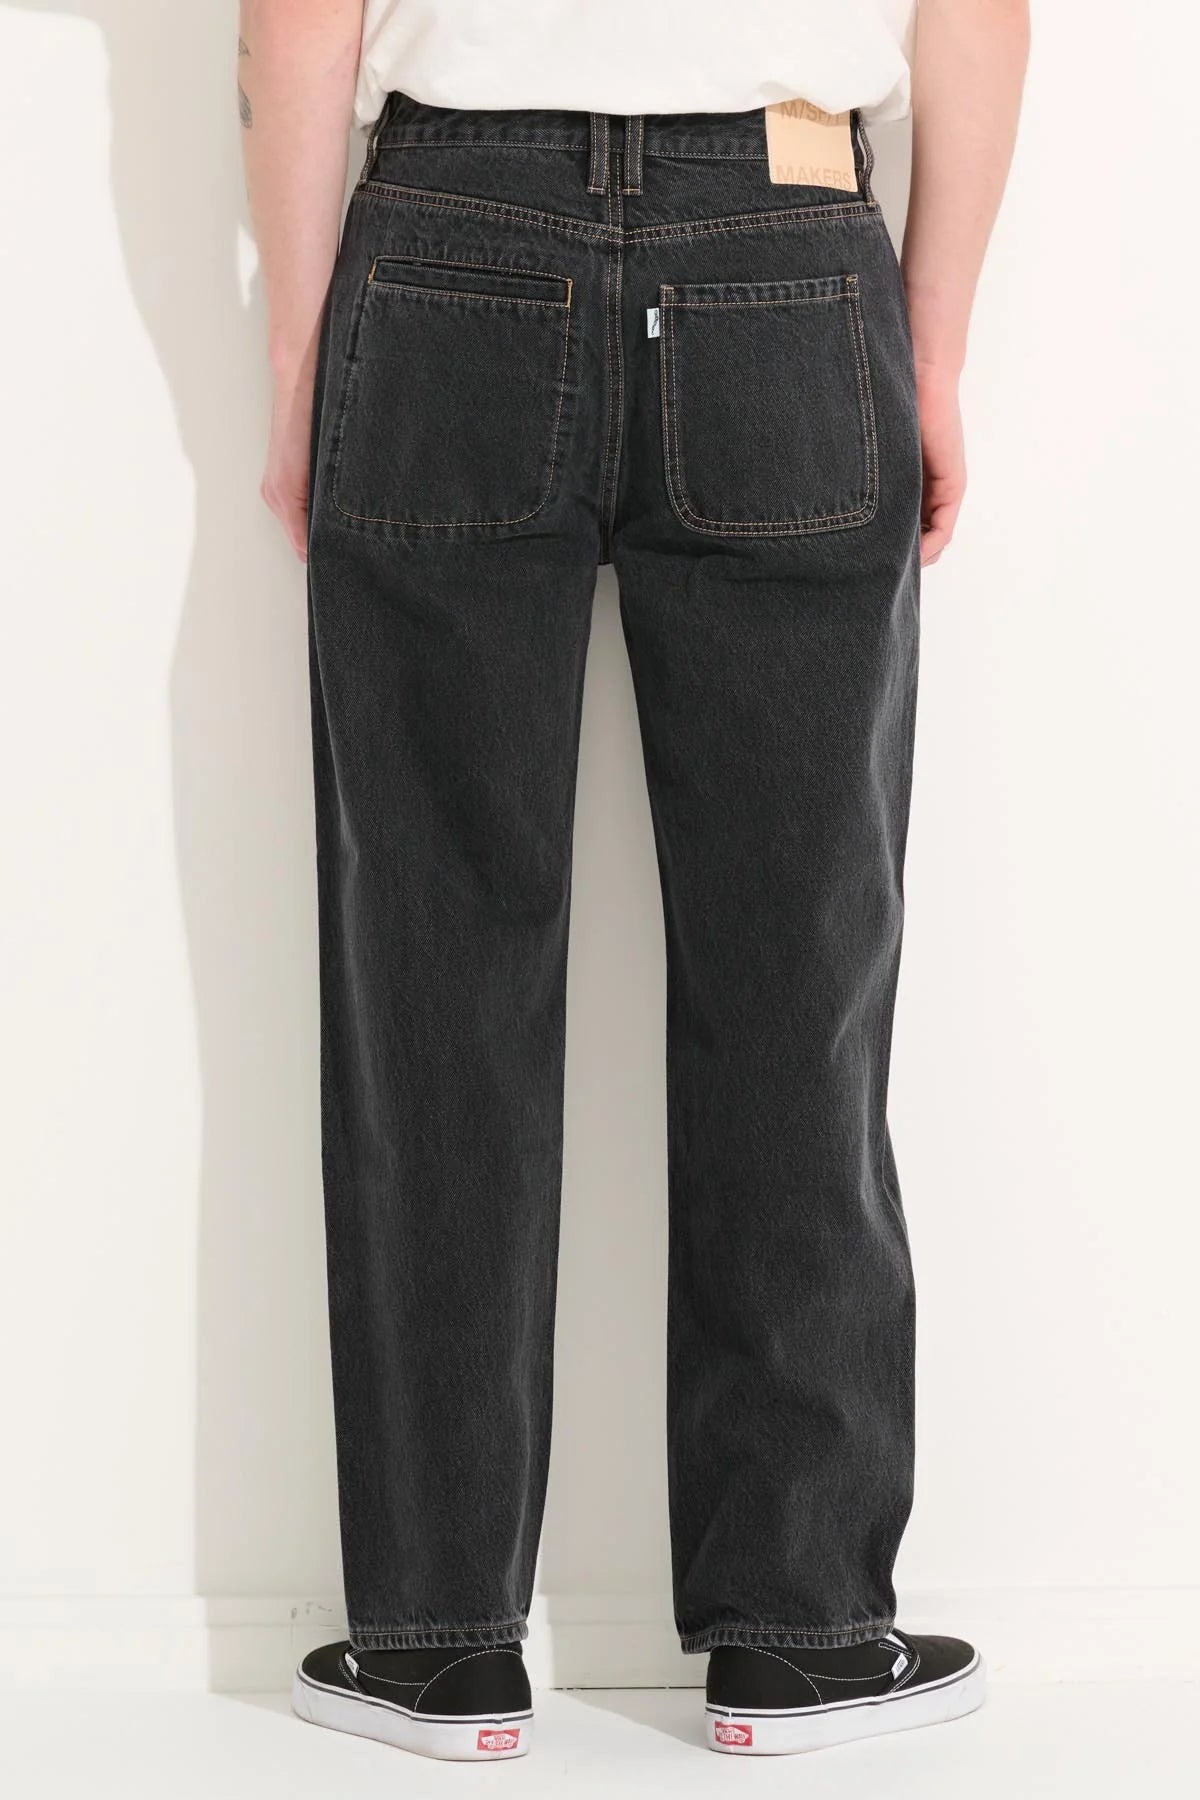 Misfit Makers Men's Relaxed Jean - Pepper